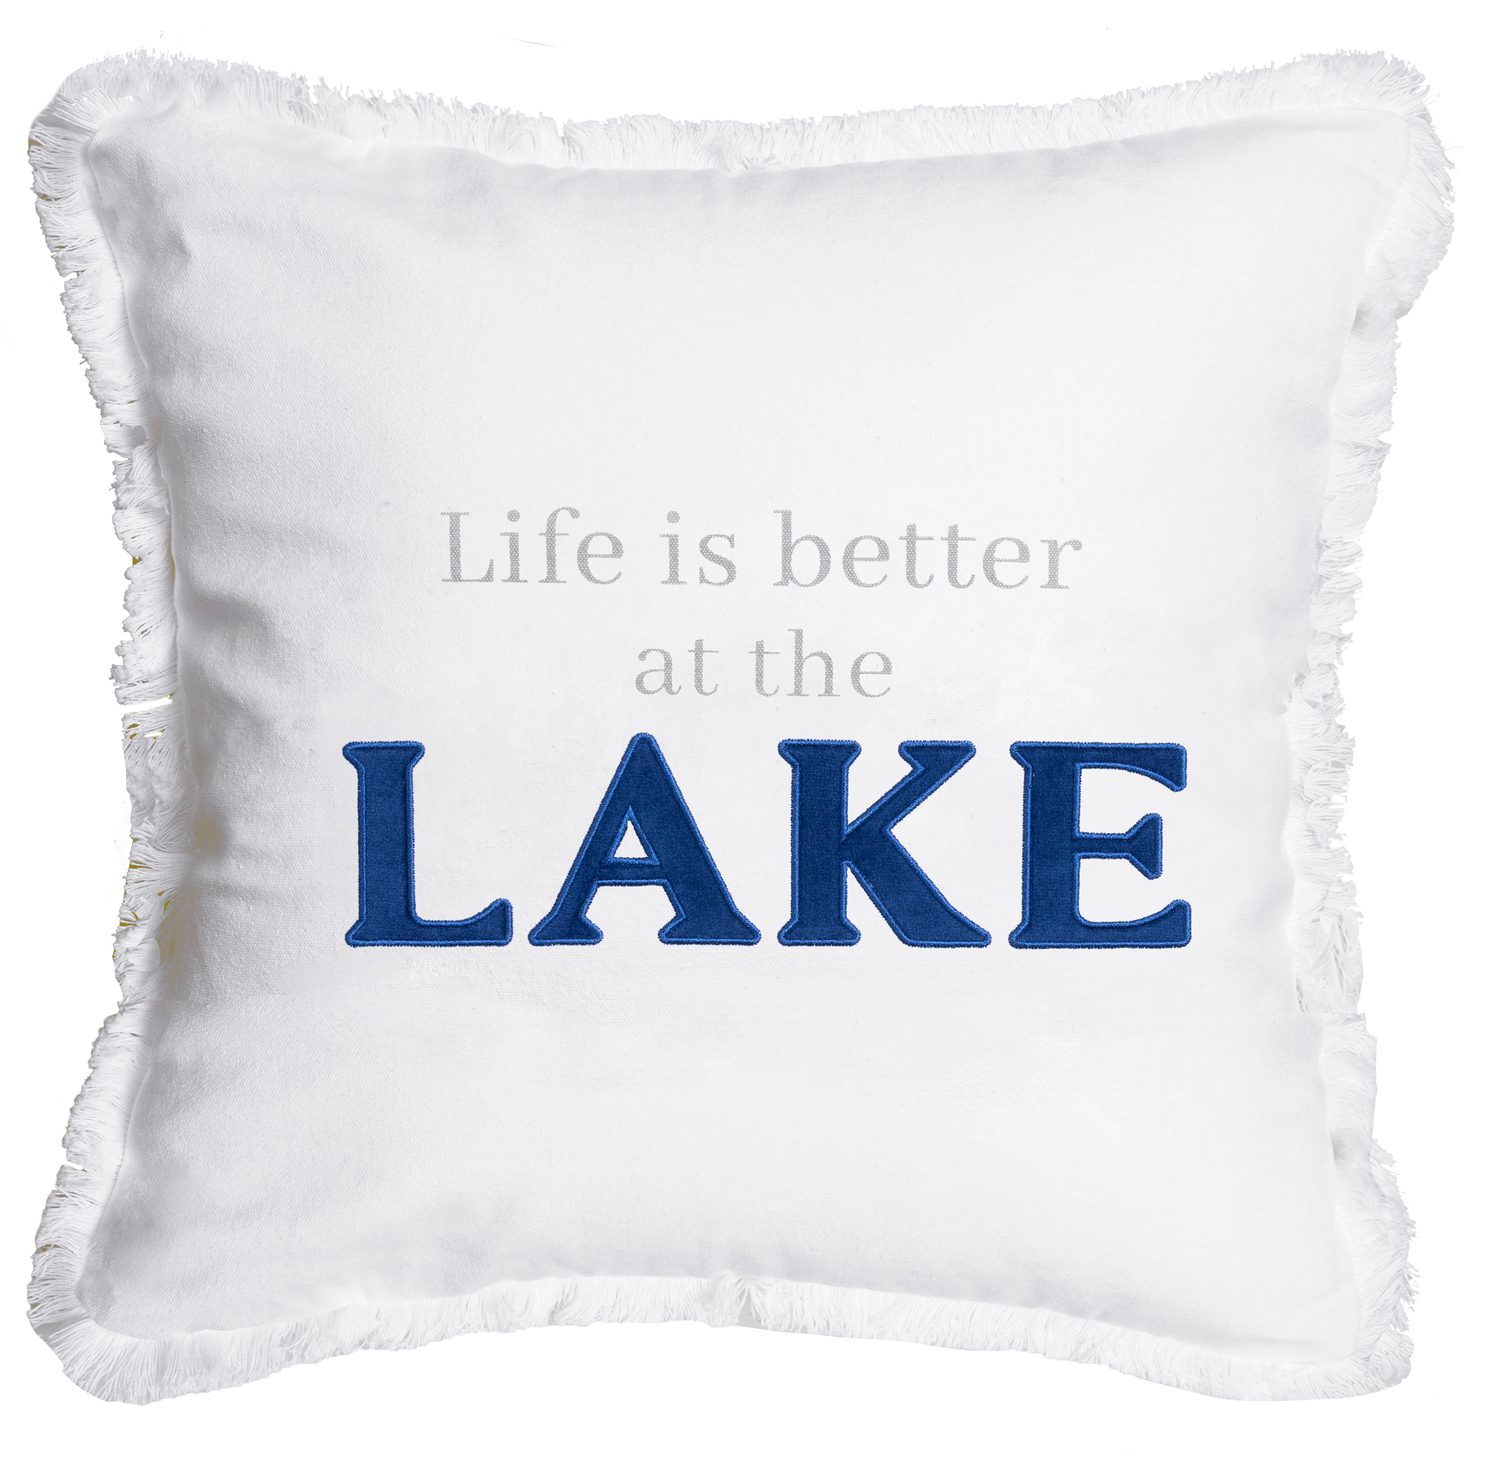 Lake by Tossing Words Around - Lake - 18" Throw Pillow Cover